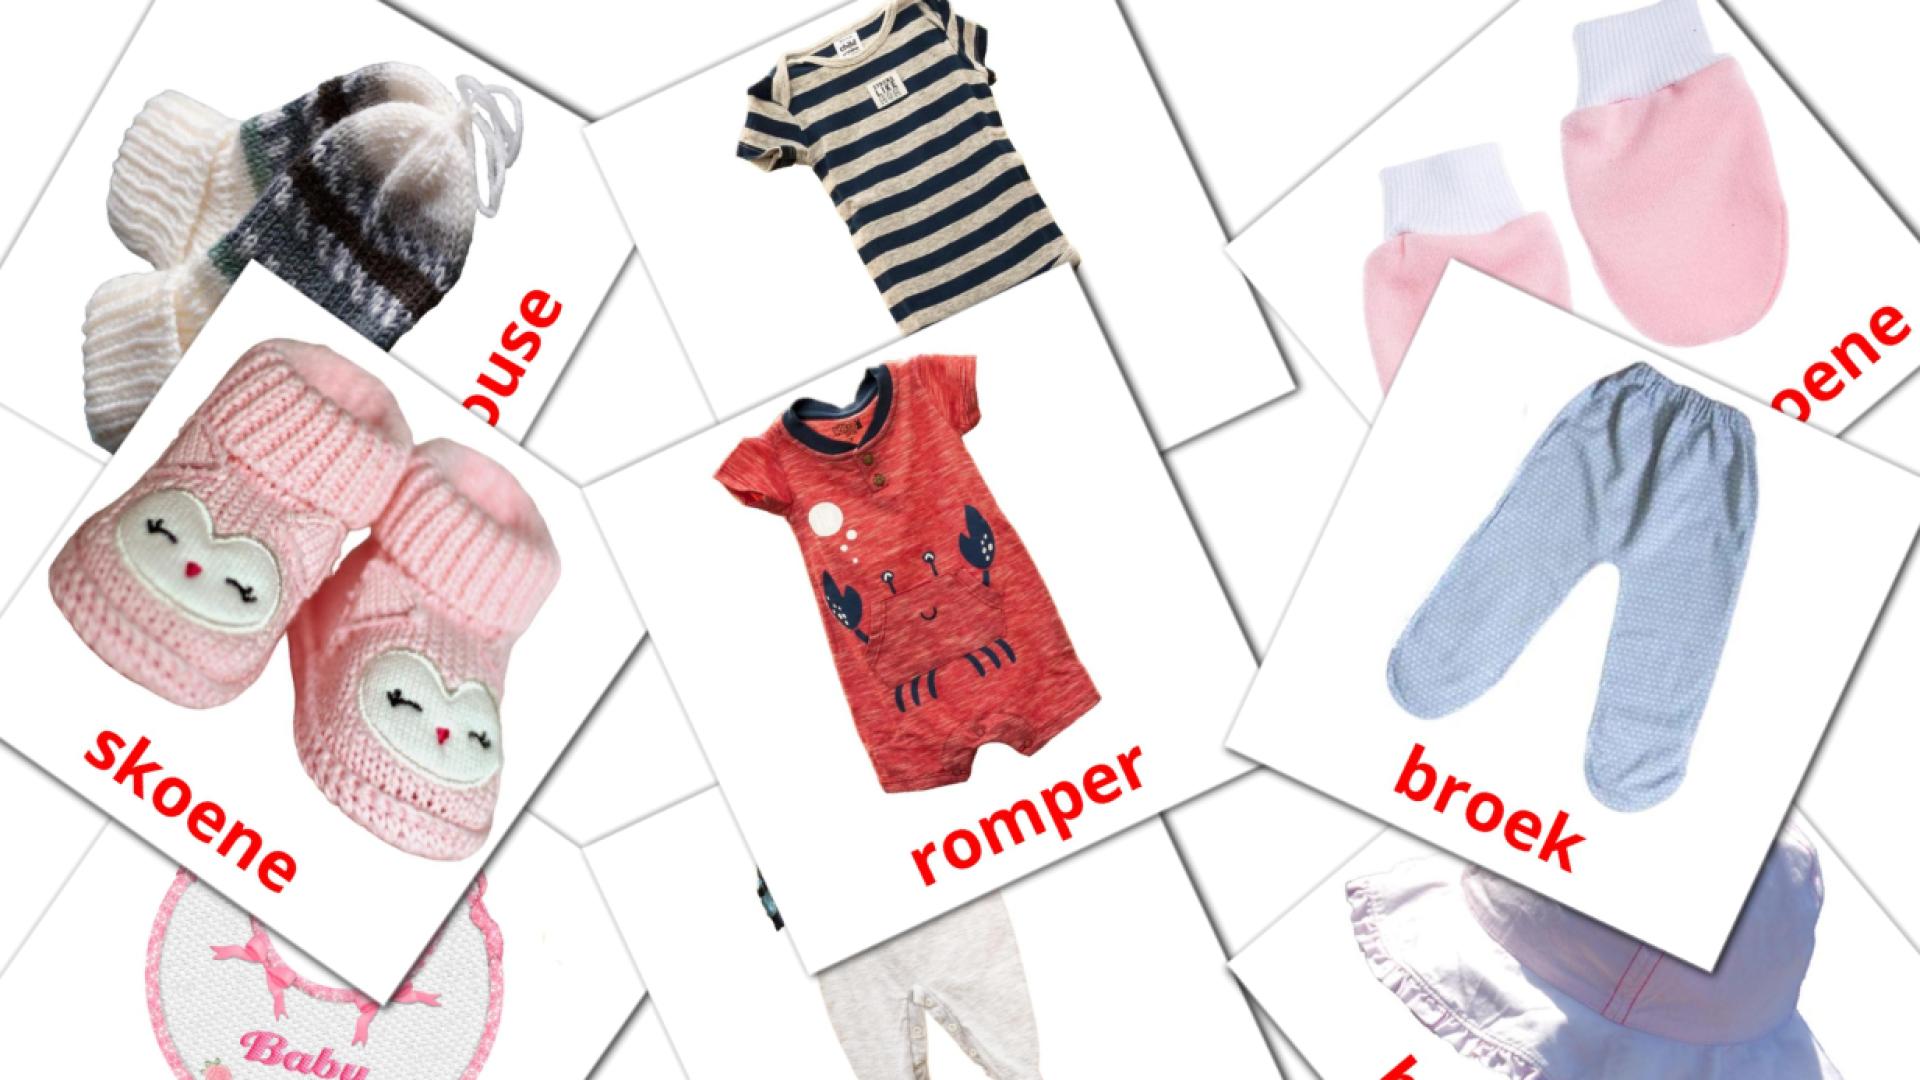 Baby clothes - afrikaans vocabulary cards